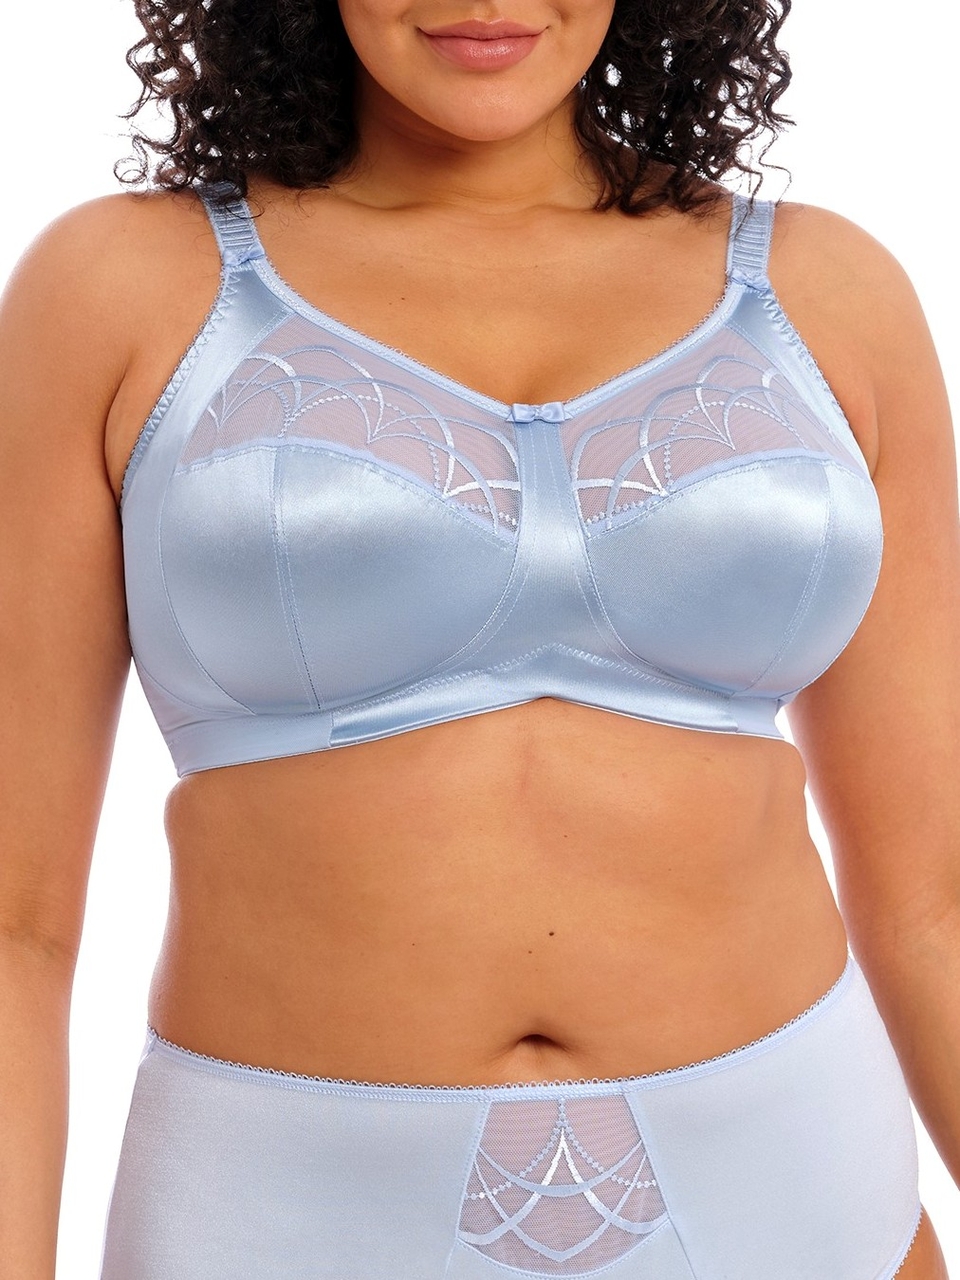 42G Bra Size in G Cup Sizes Maternity, Seamless and Spacer Bras